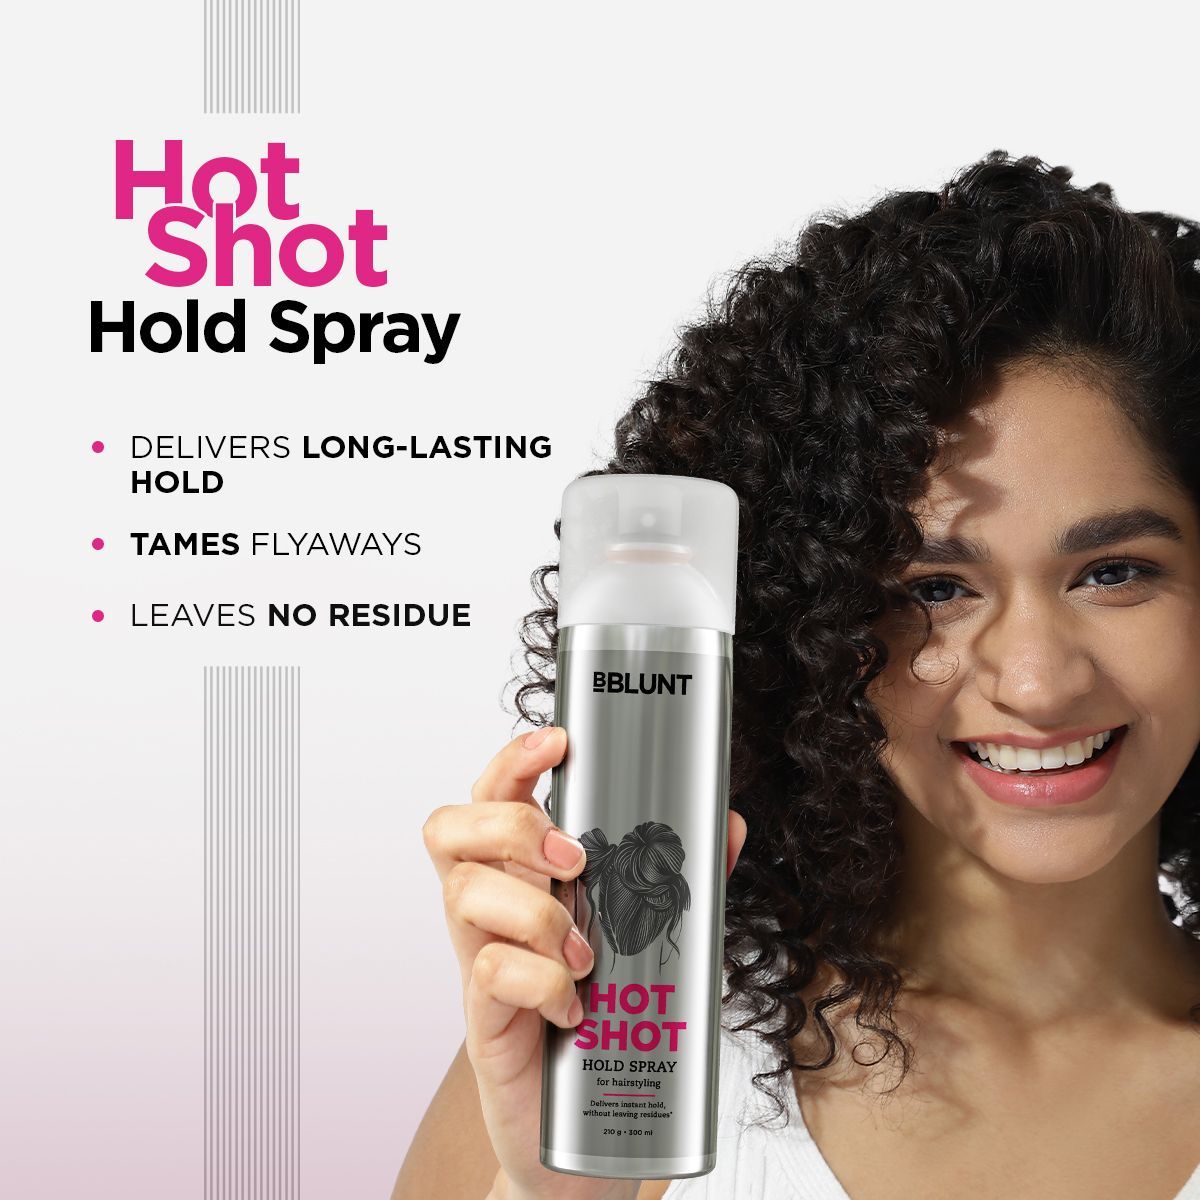 15 Best Hairsprays To Suit All Hair Types For Hold Volume And Shine   Glamour UK